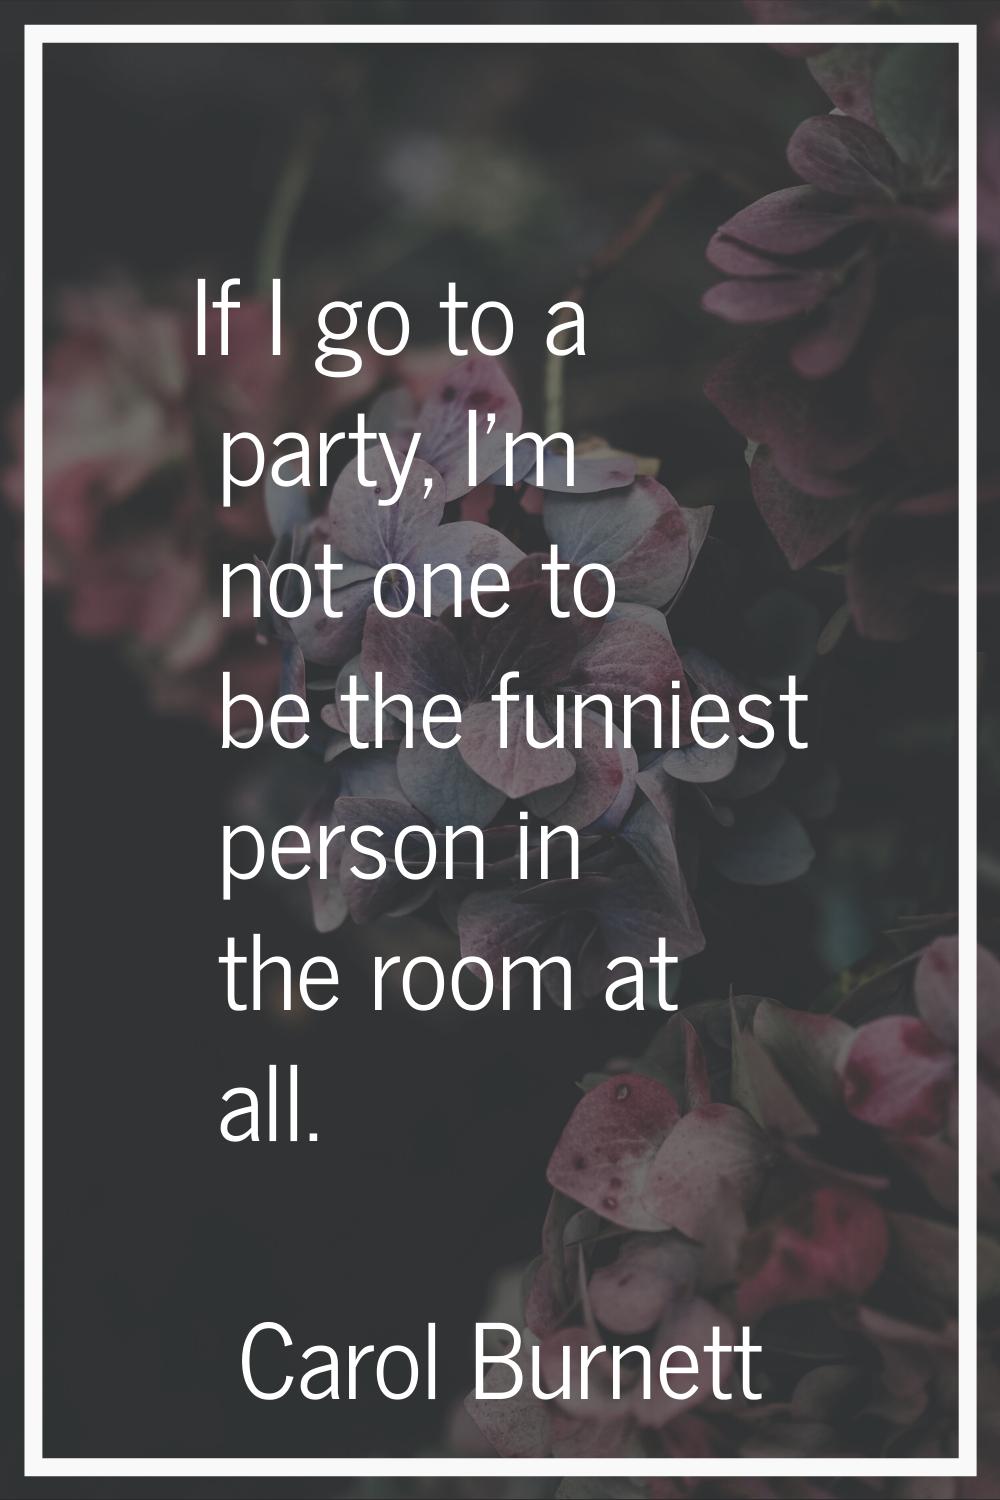 If I go to a party, I'm not one to be the funniest person in the room at all.